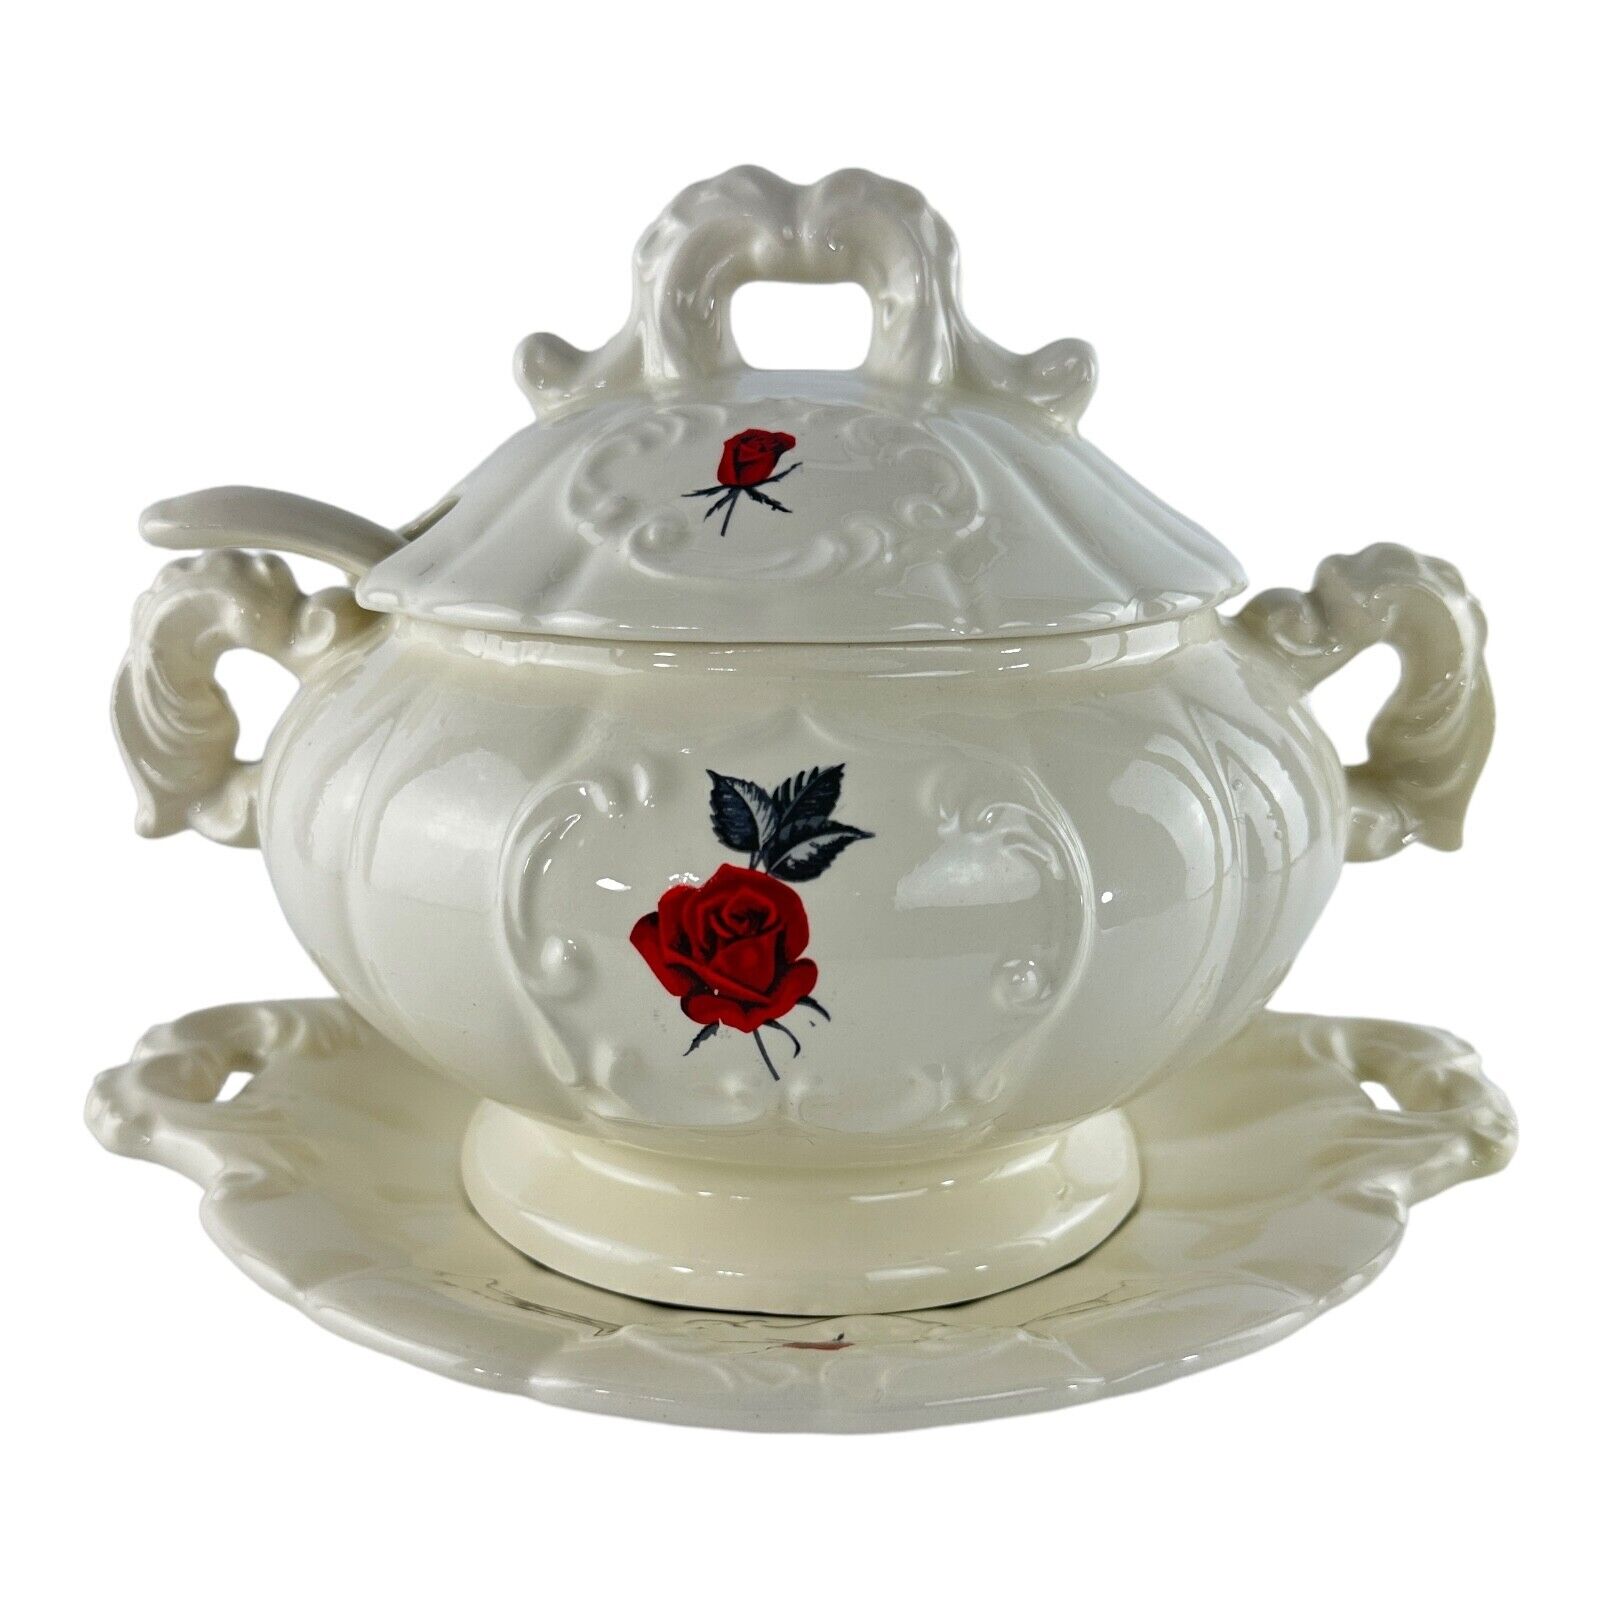 Vintage Cream Color Ceramic Soup Tureen with Underplate and Serving Spoon Roses